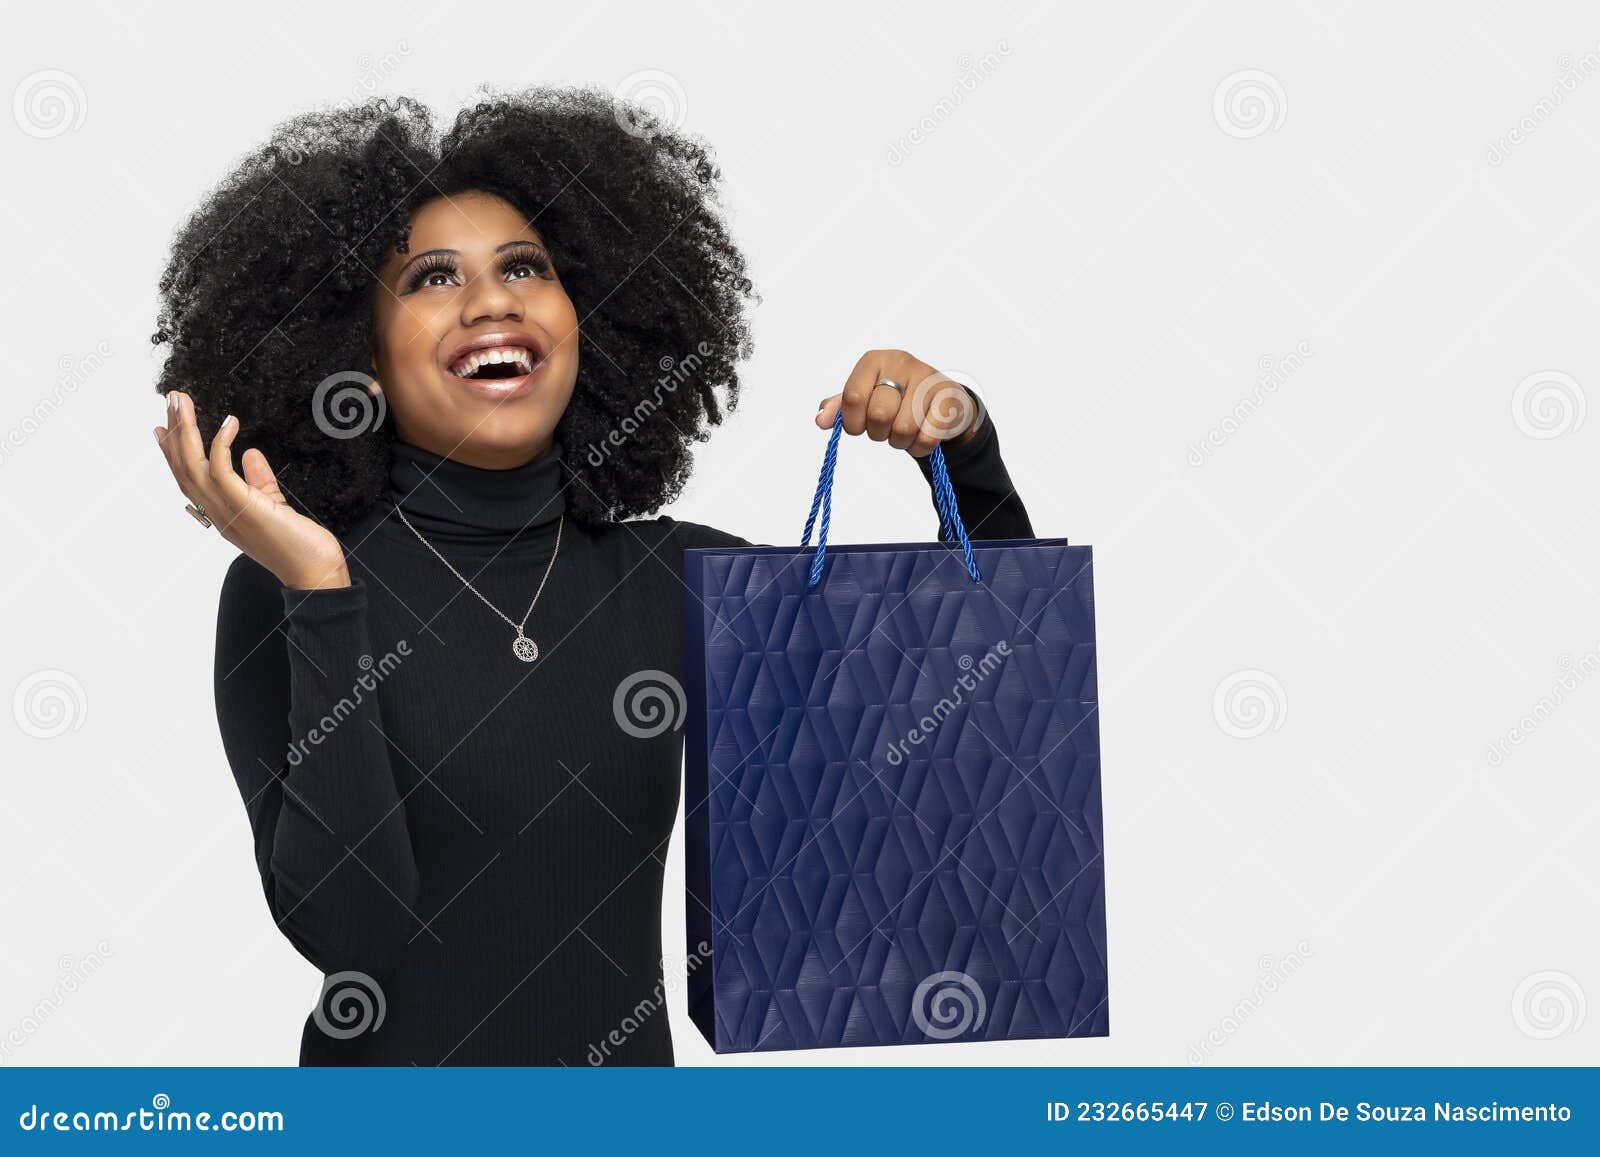 portrait of a happy young woman with big smile looking up holding shopping bag  on gray background, end of year sale or mi